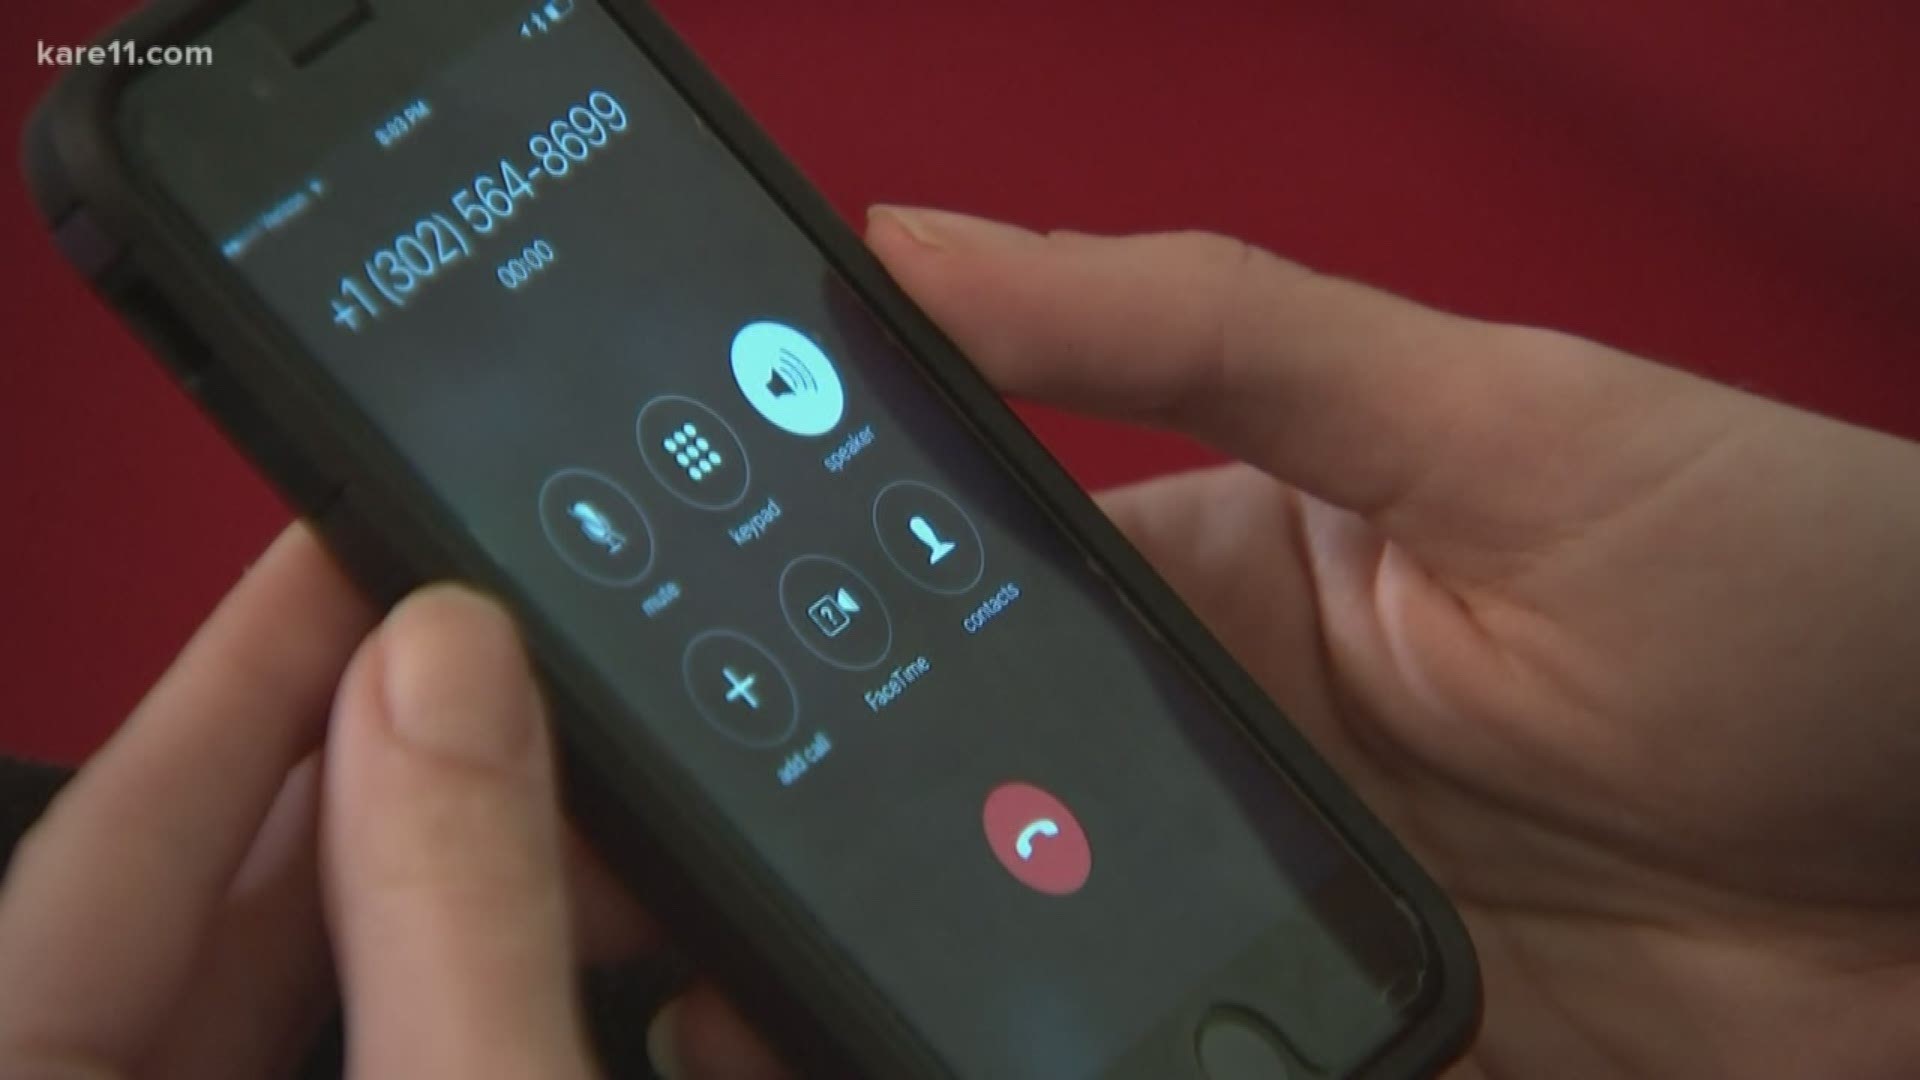 Industry experts have dubbed 2019 "The Year of the Robocall." With calls going up 22% over 2018, nearly twice as many as two years ago.